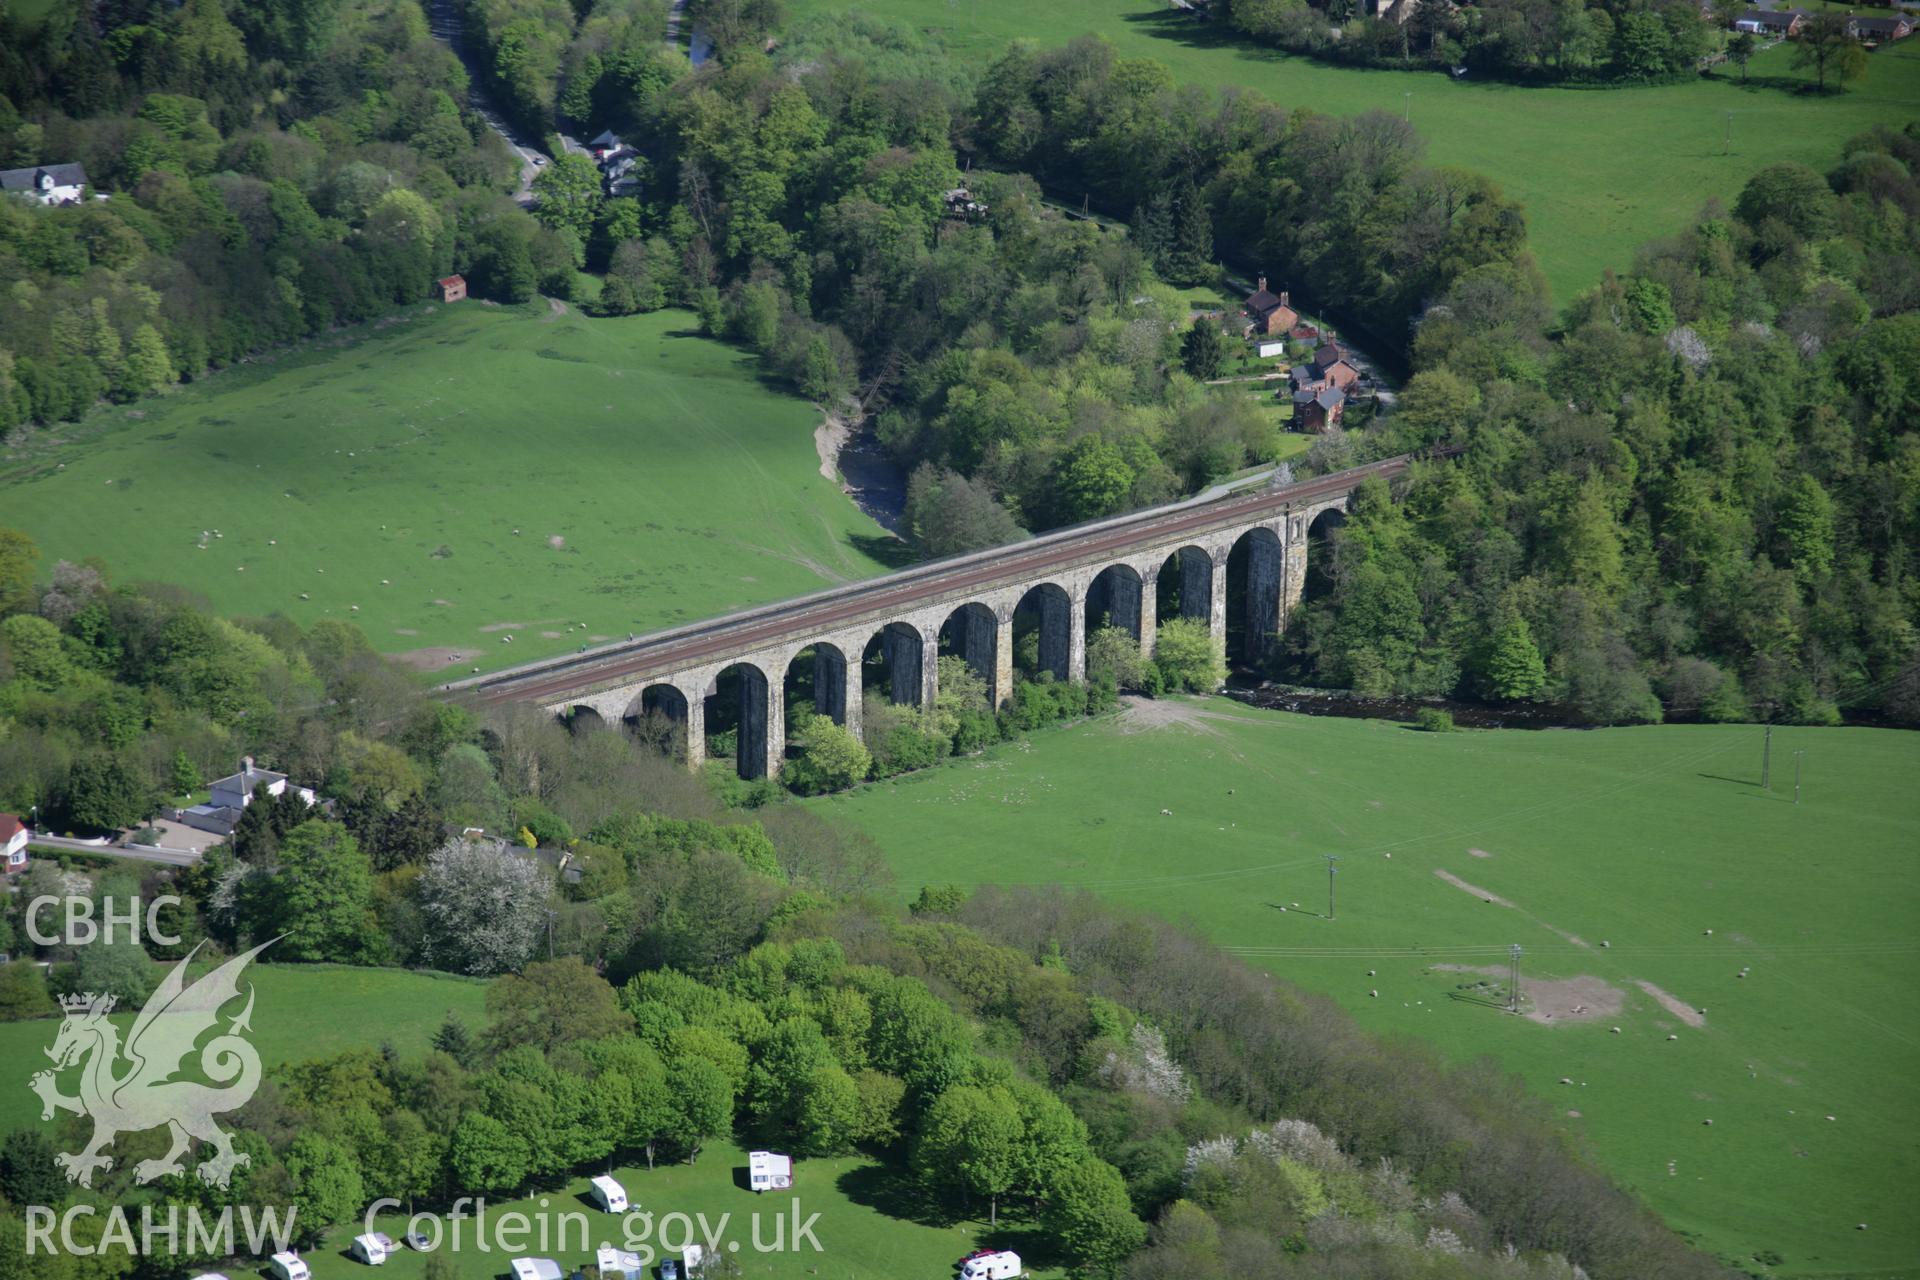 RCAHMW digital colour oblique photograph of the Chirk Railway Viaduct and the Llangollen Canal aqueduct from the north-west. Taken on 05/05/2006 by T.G. Driver.